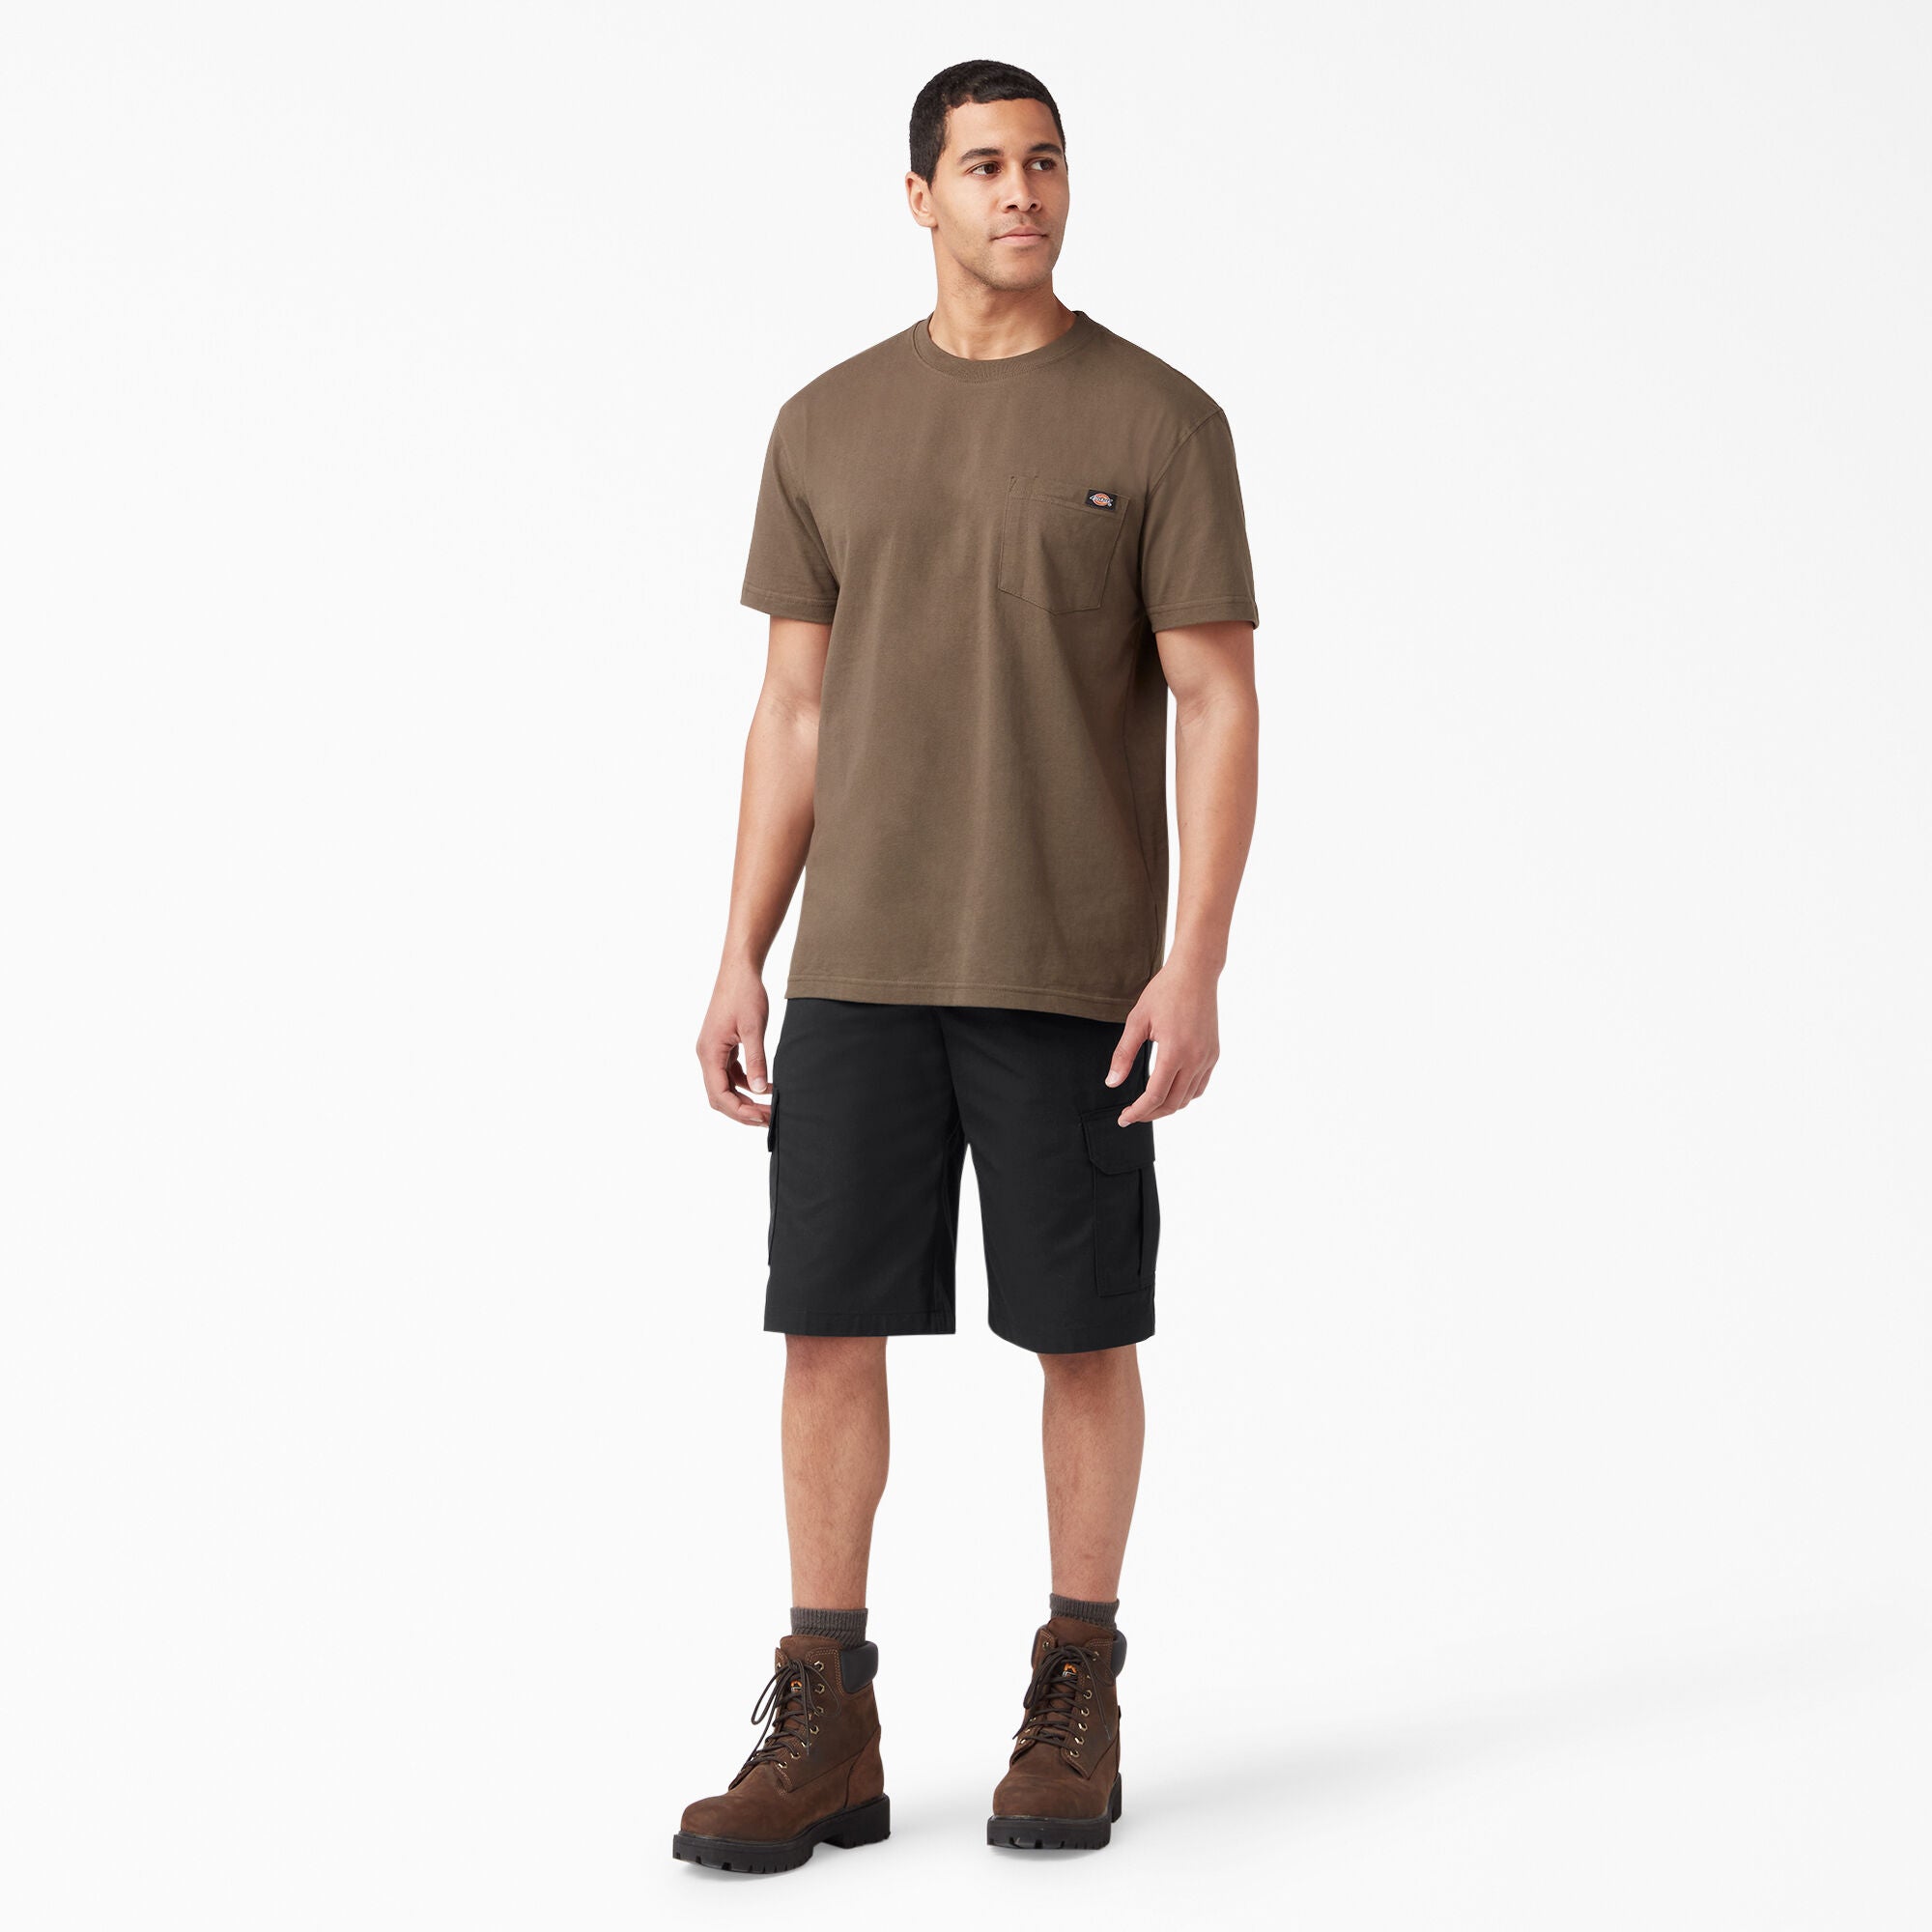 Dickies Relaxed Fit Cargo Shorts, 13", Black